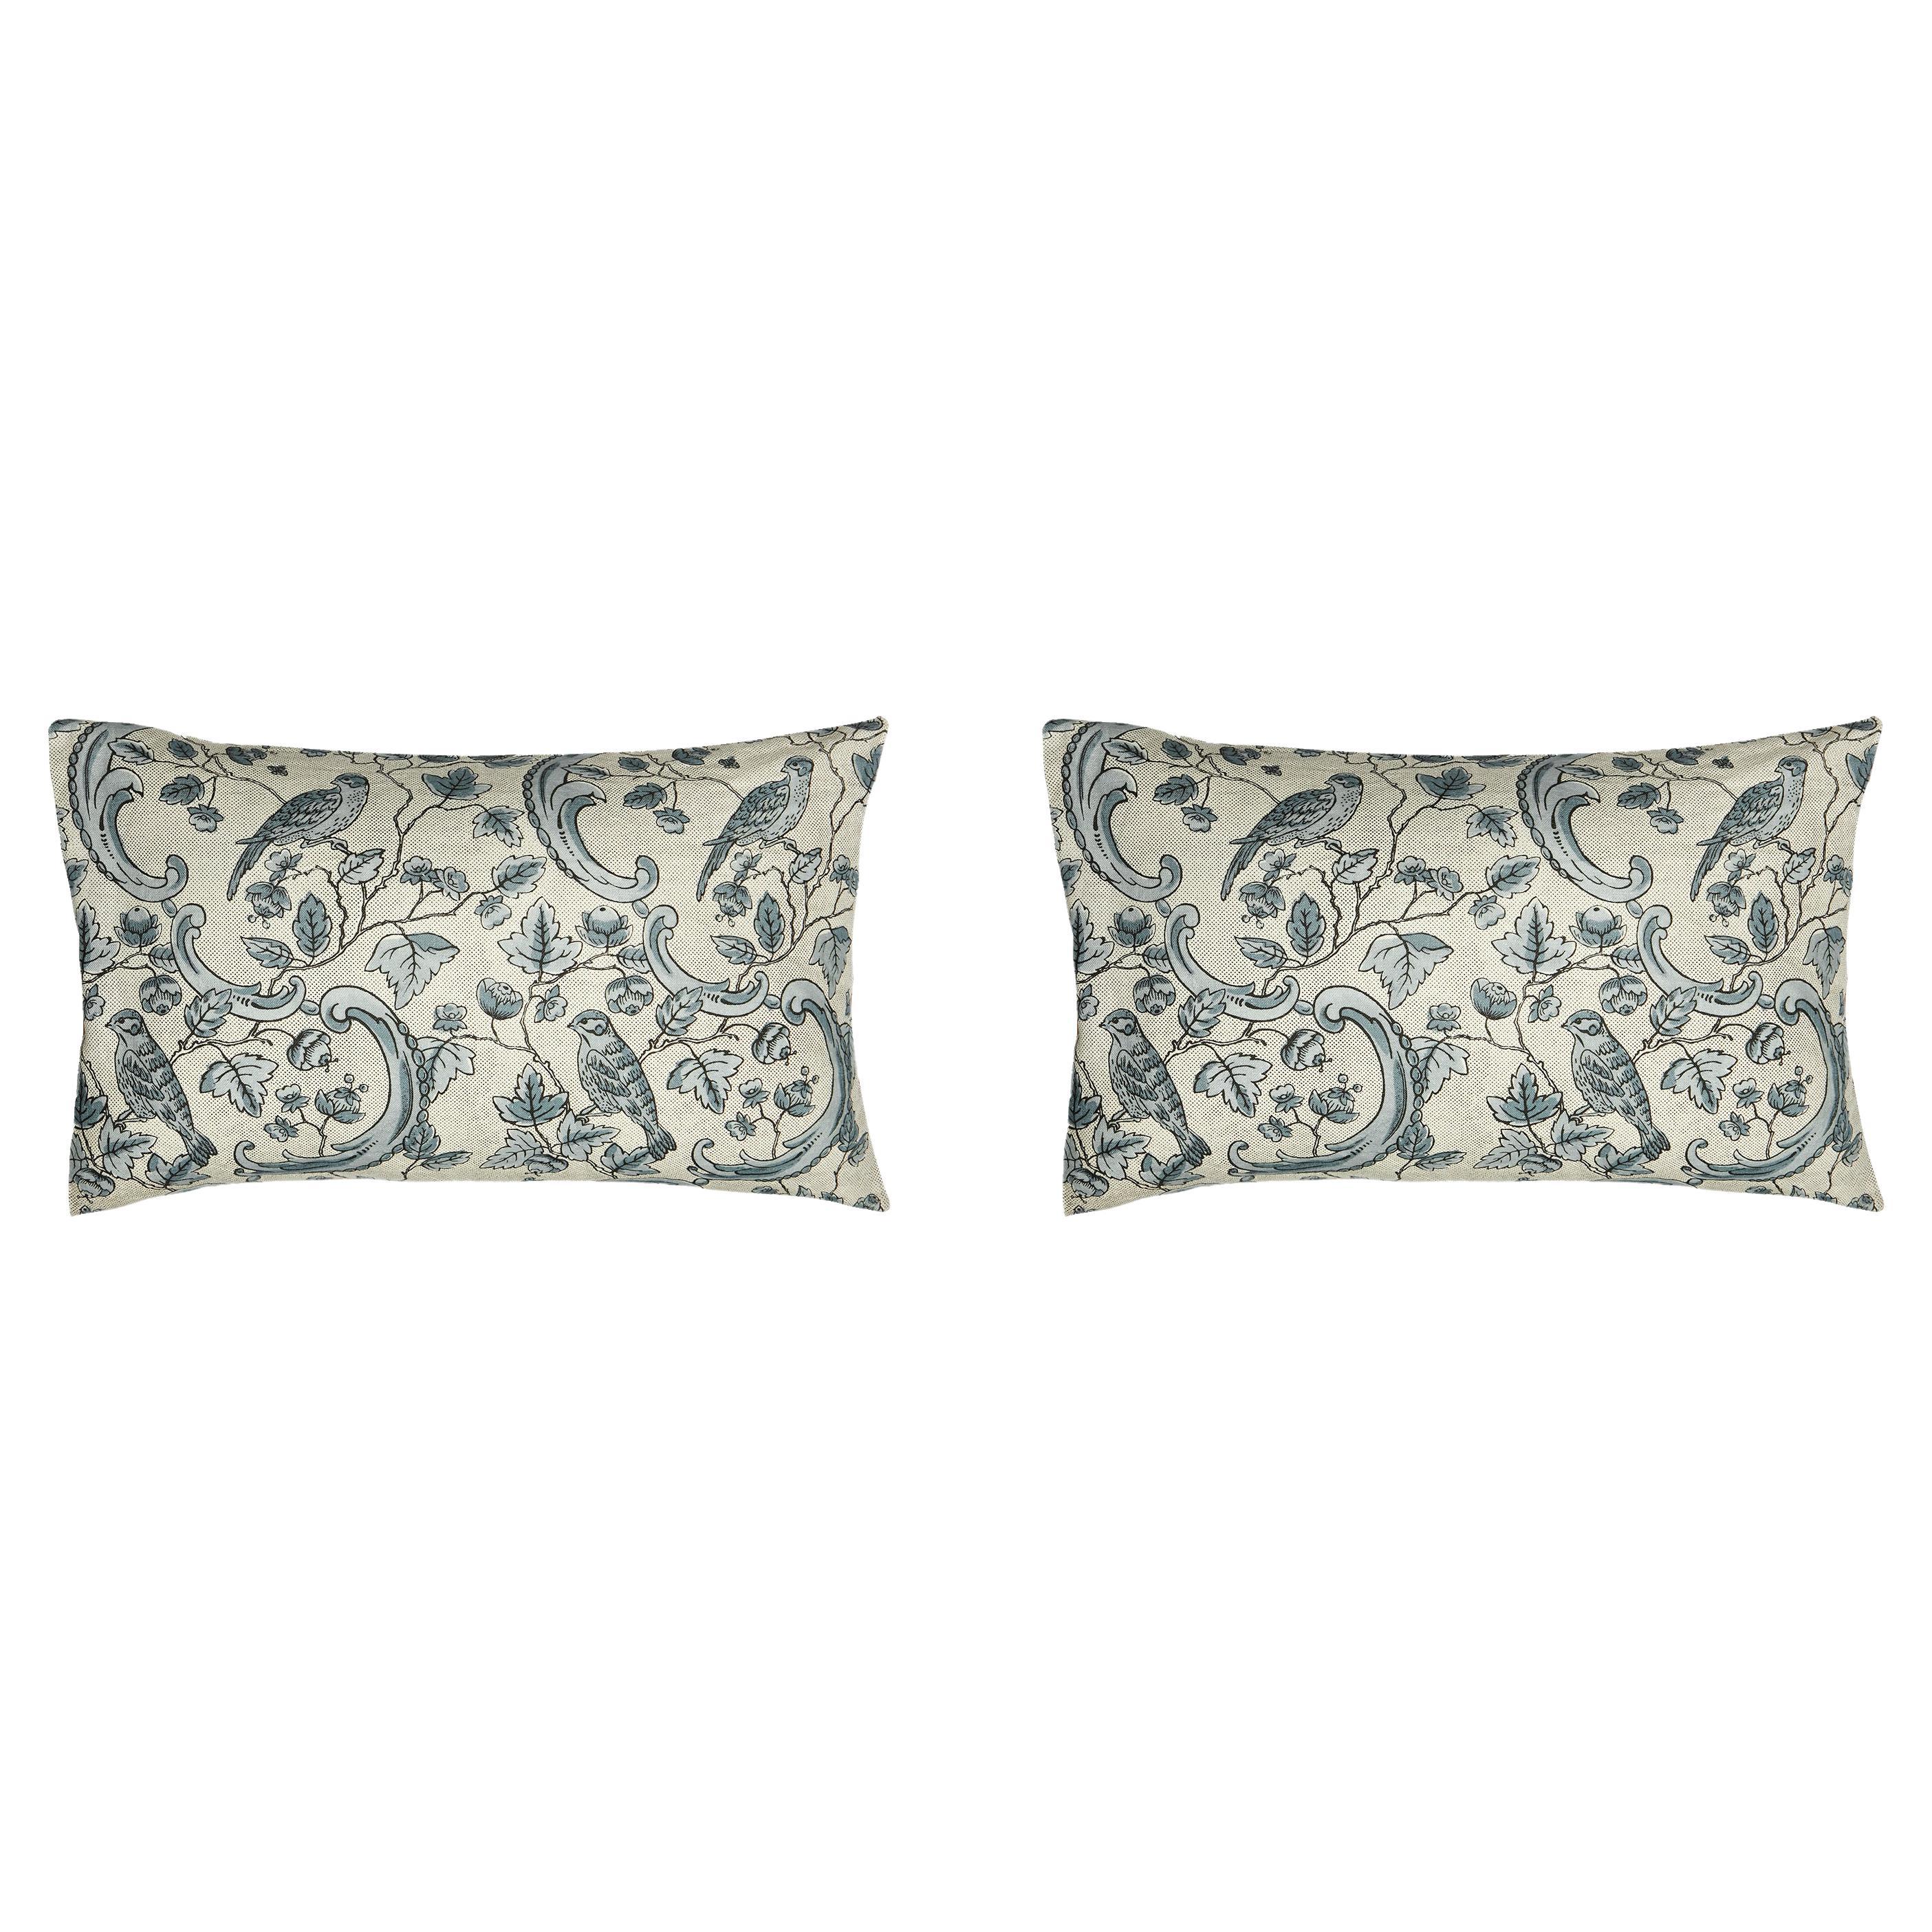 Pair of Linen Pillow Cushions - Oiseaux and Feuilla - Designed and Made in Paris For Sale